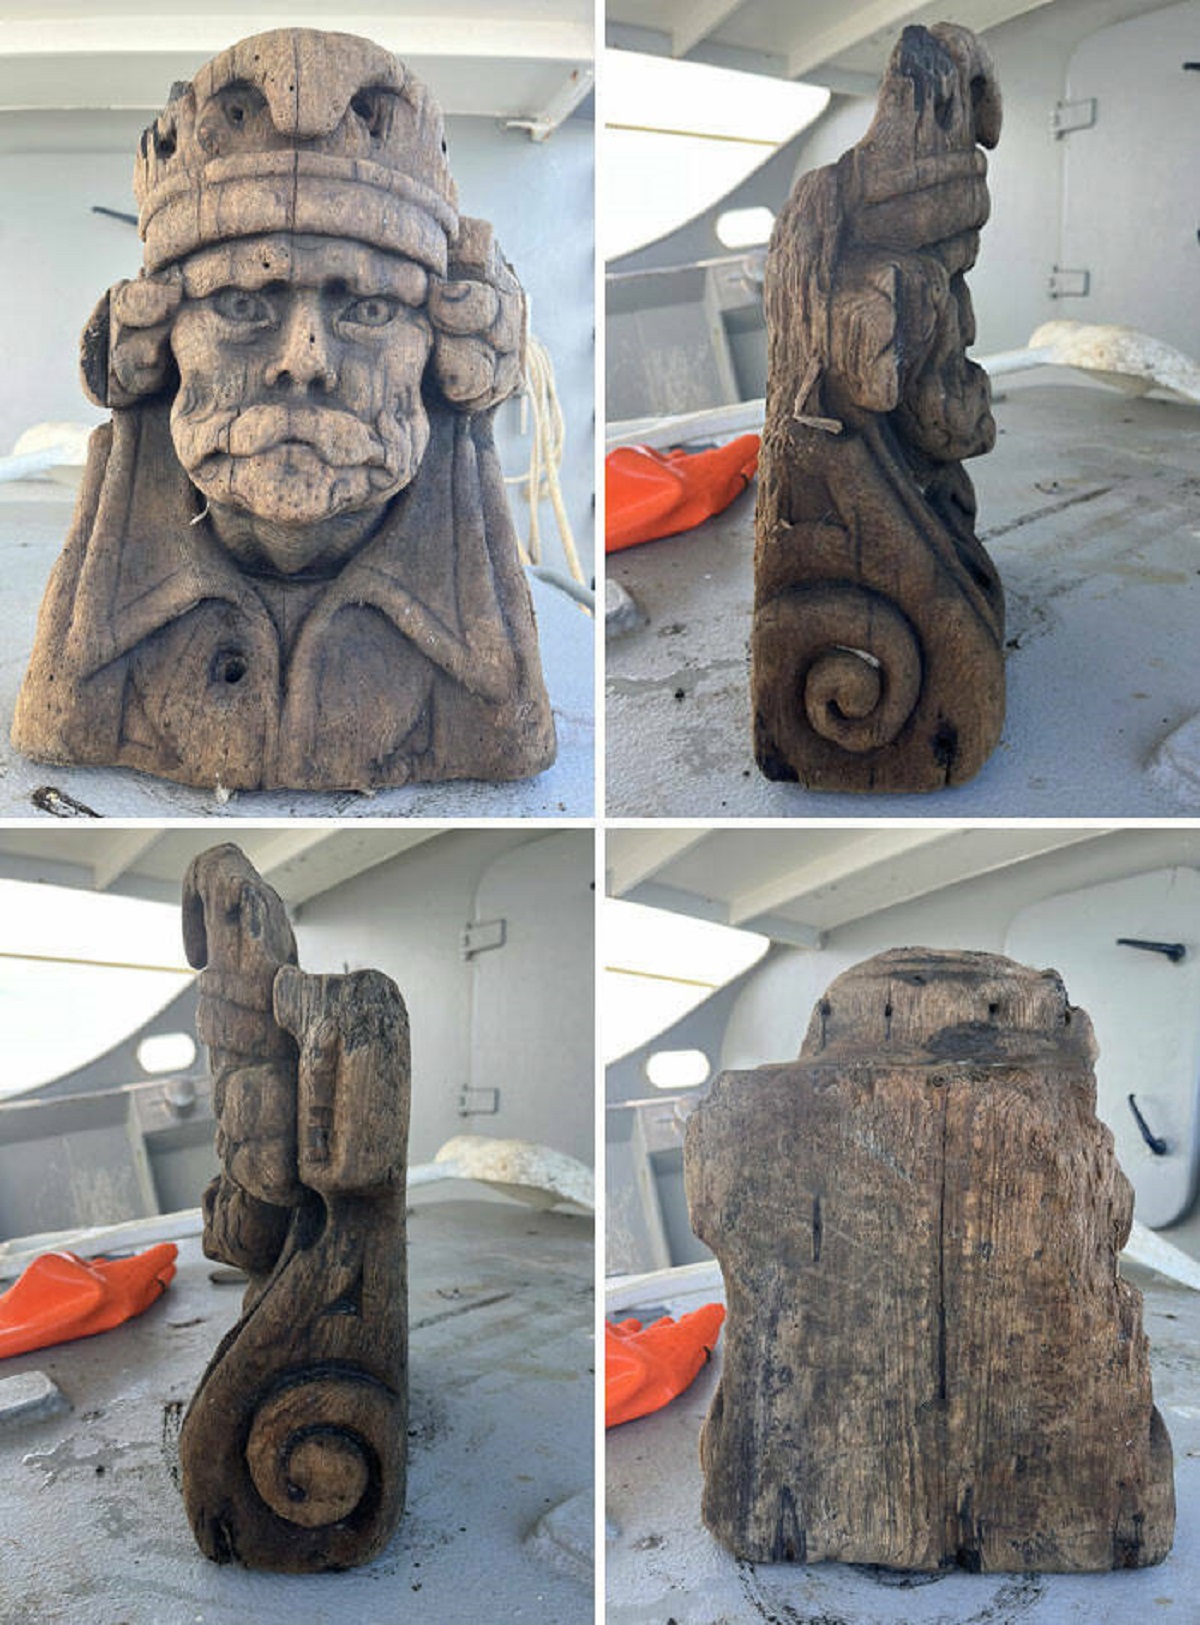 "A Centuries-Old Wooden Statue Was Recently Discovered By A Group Of Dutch Shrimp Fishermen Off The Coast Of Texel"

"A municipal archaeologist for that region believes that the statue came from a warship, possibly during the 80 Years' War, which stretched from the mid-1500s to mid-1600s."